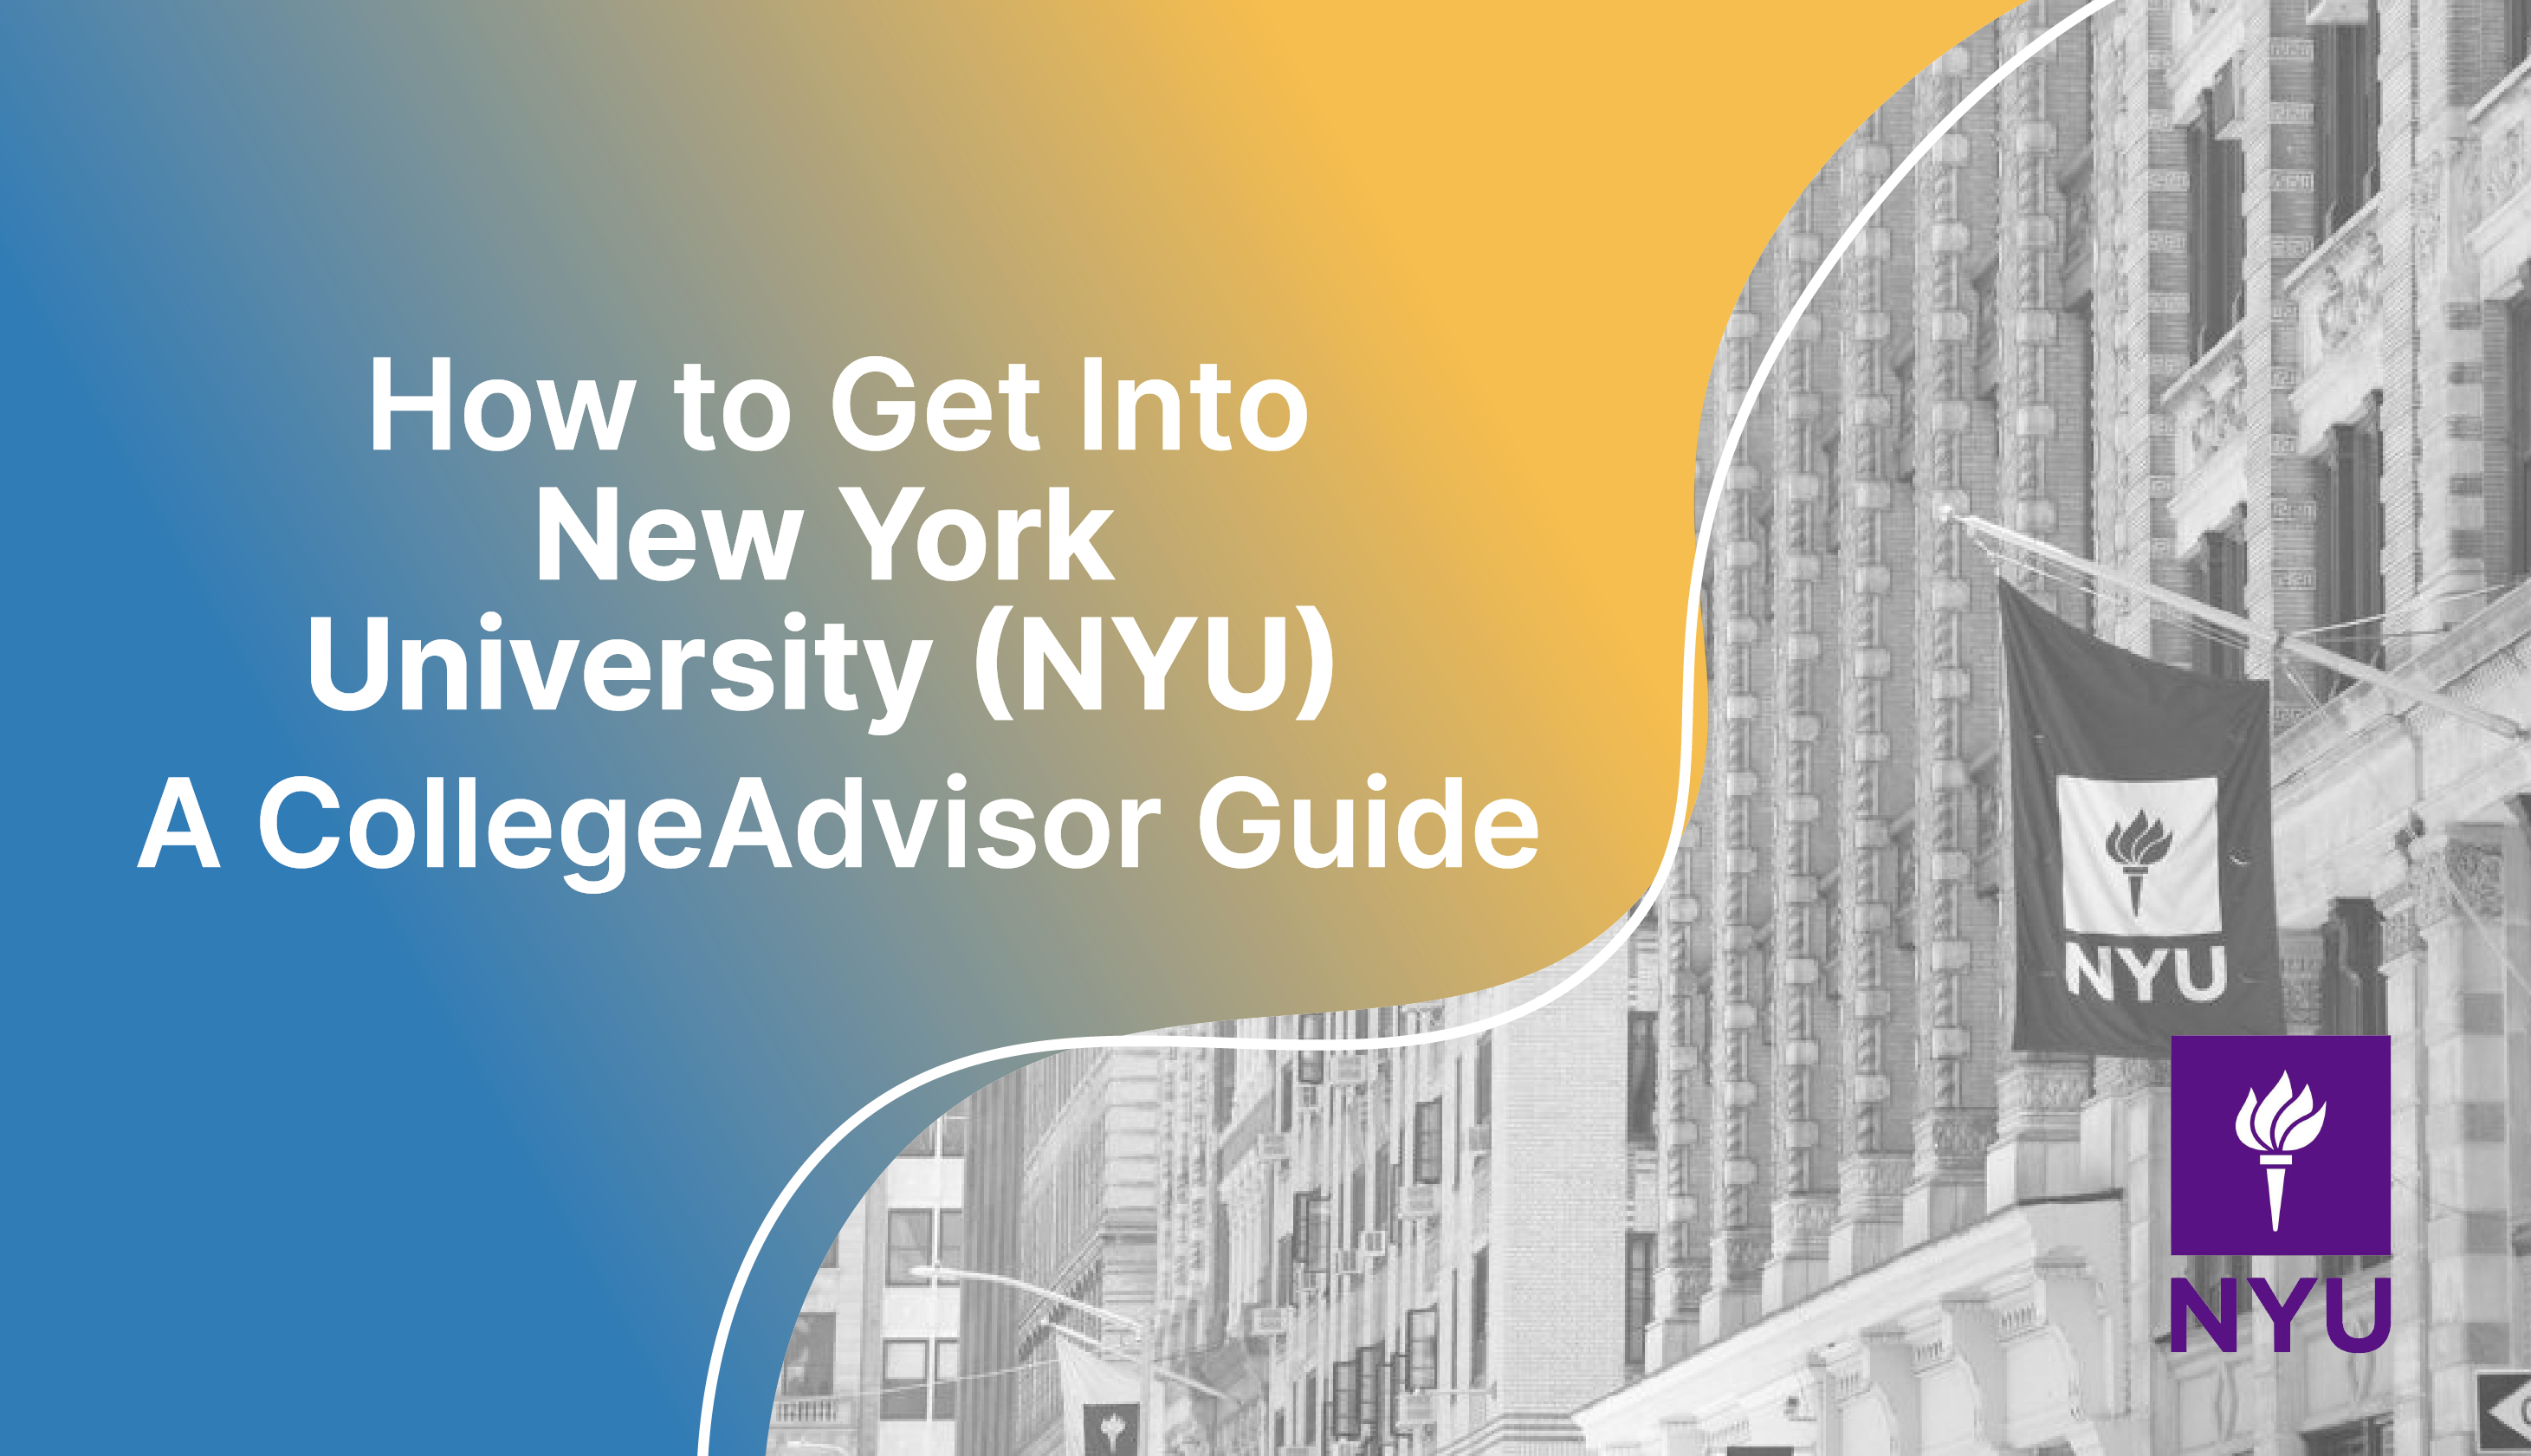 How to Get Into NYU Guide